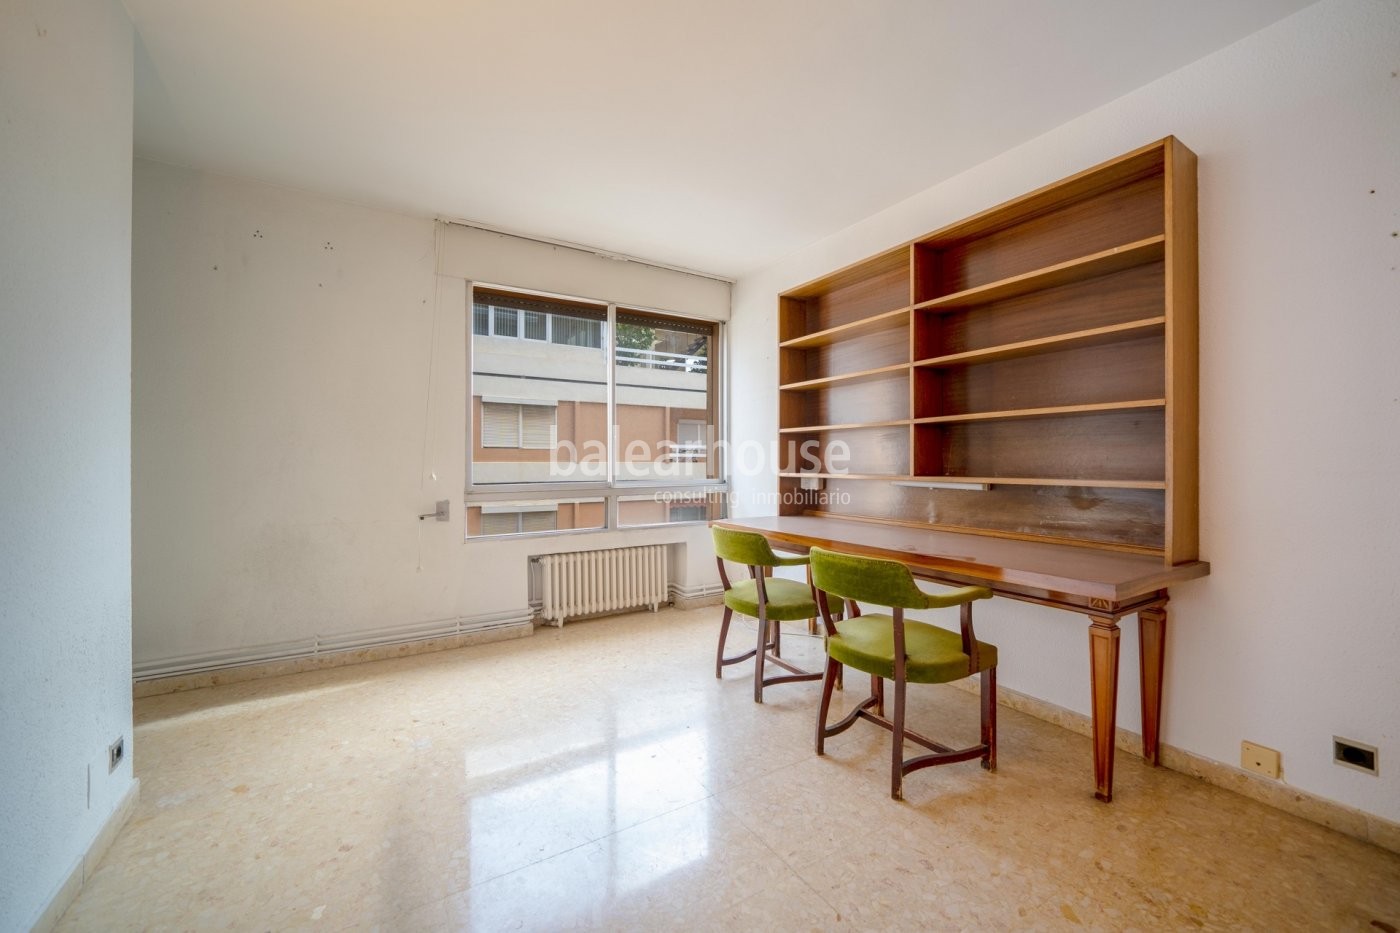 Fantastic flat in the centre of Palma with terrace and excellent unobstructed sea views